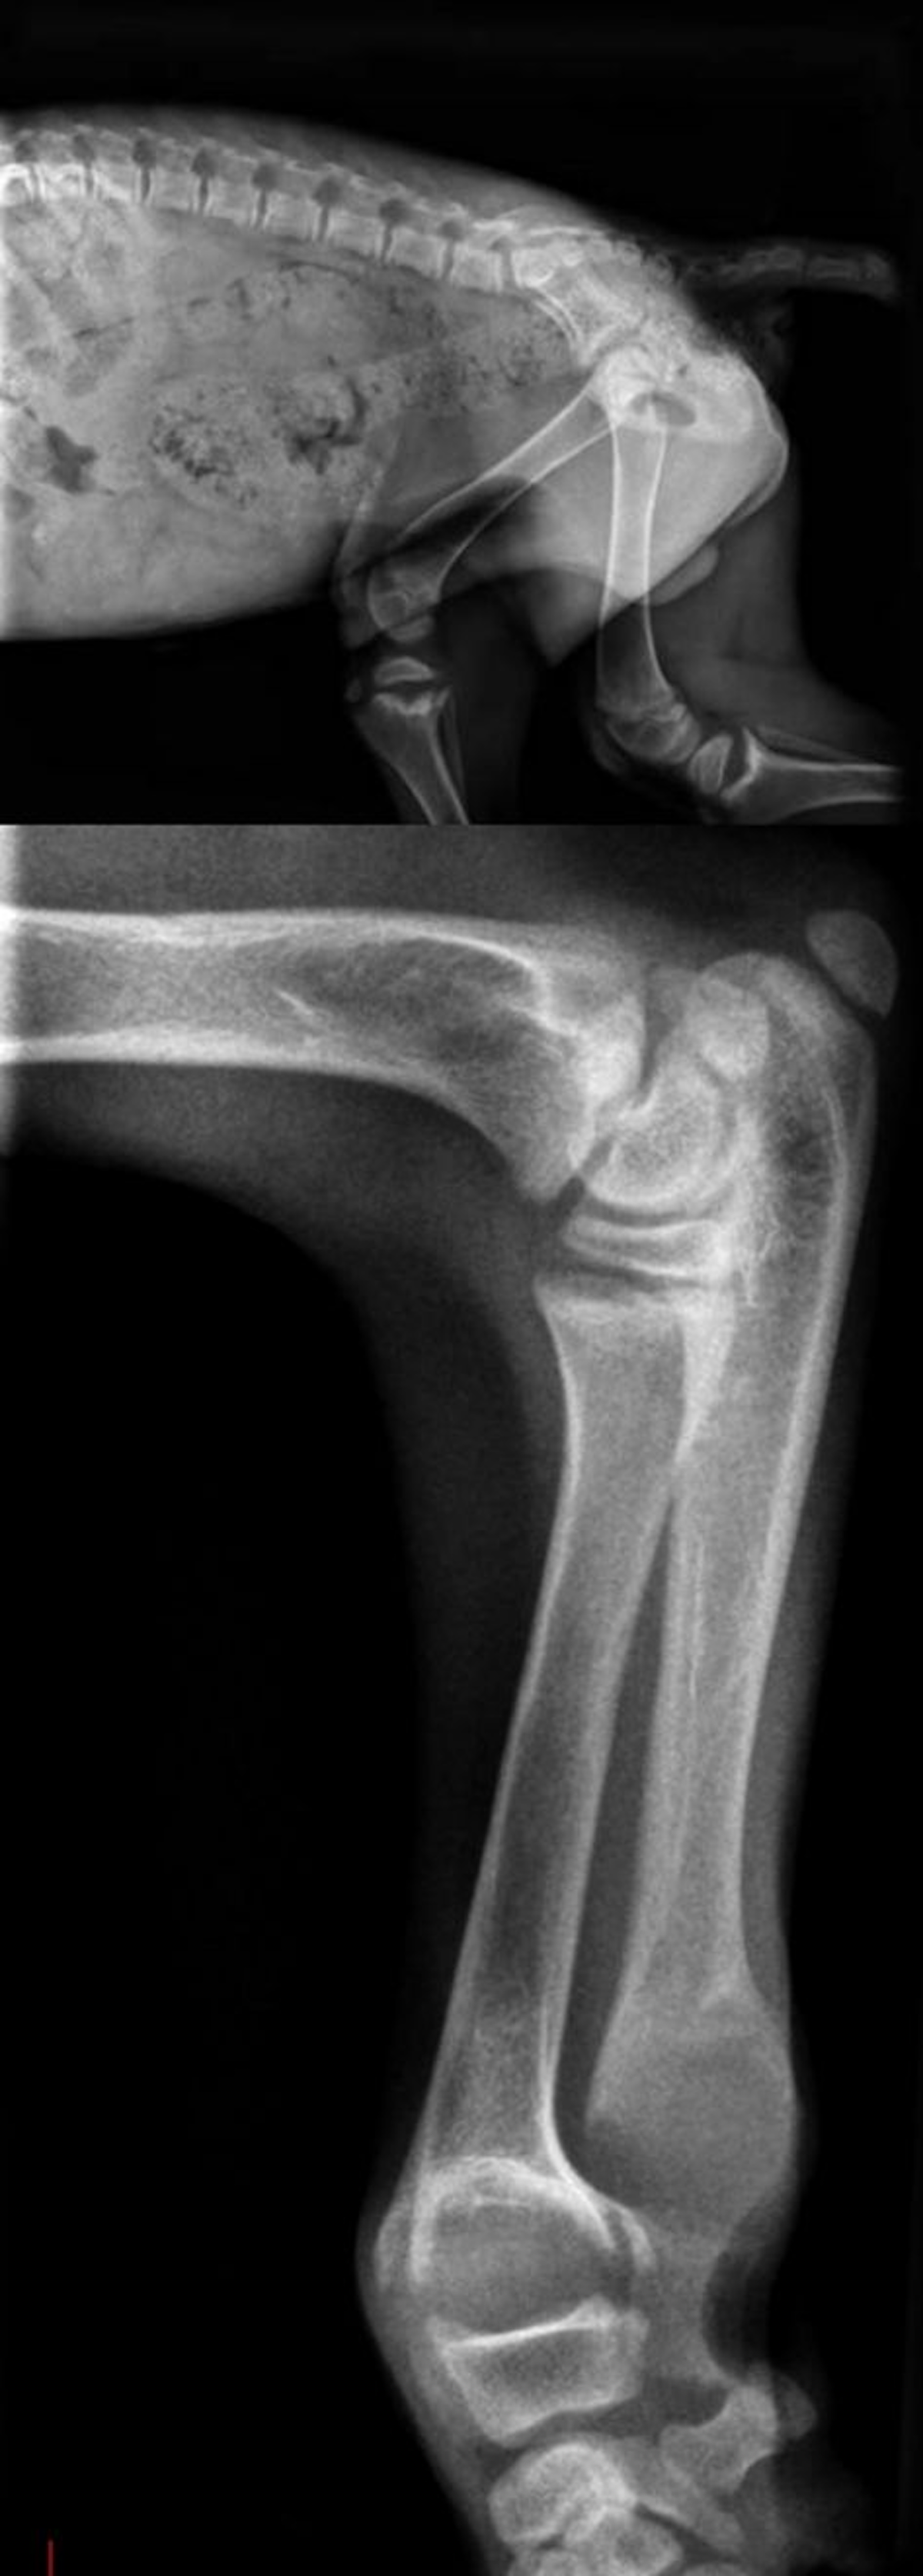 Right lateral pelvis and radius/ulna radiographs of a young (estimated 1-year-old) dog. The radial, ulnar and tibial physes exhibit expansile widening with cup-shaped flaring, and there is diffuse osteopenia present. These findings are consistent with rickets.